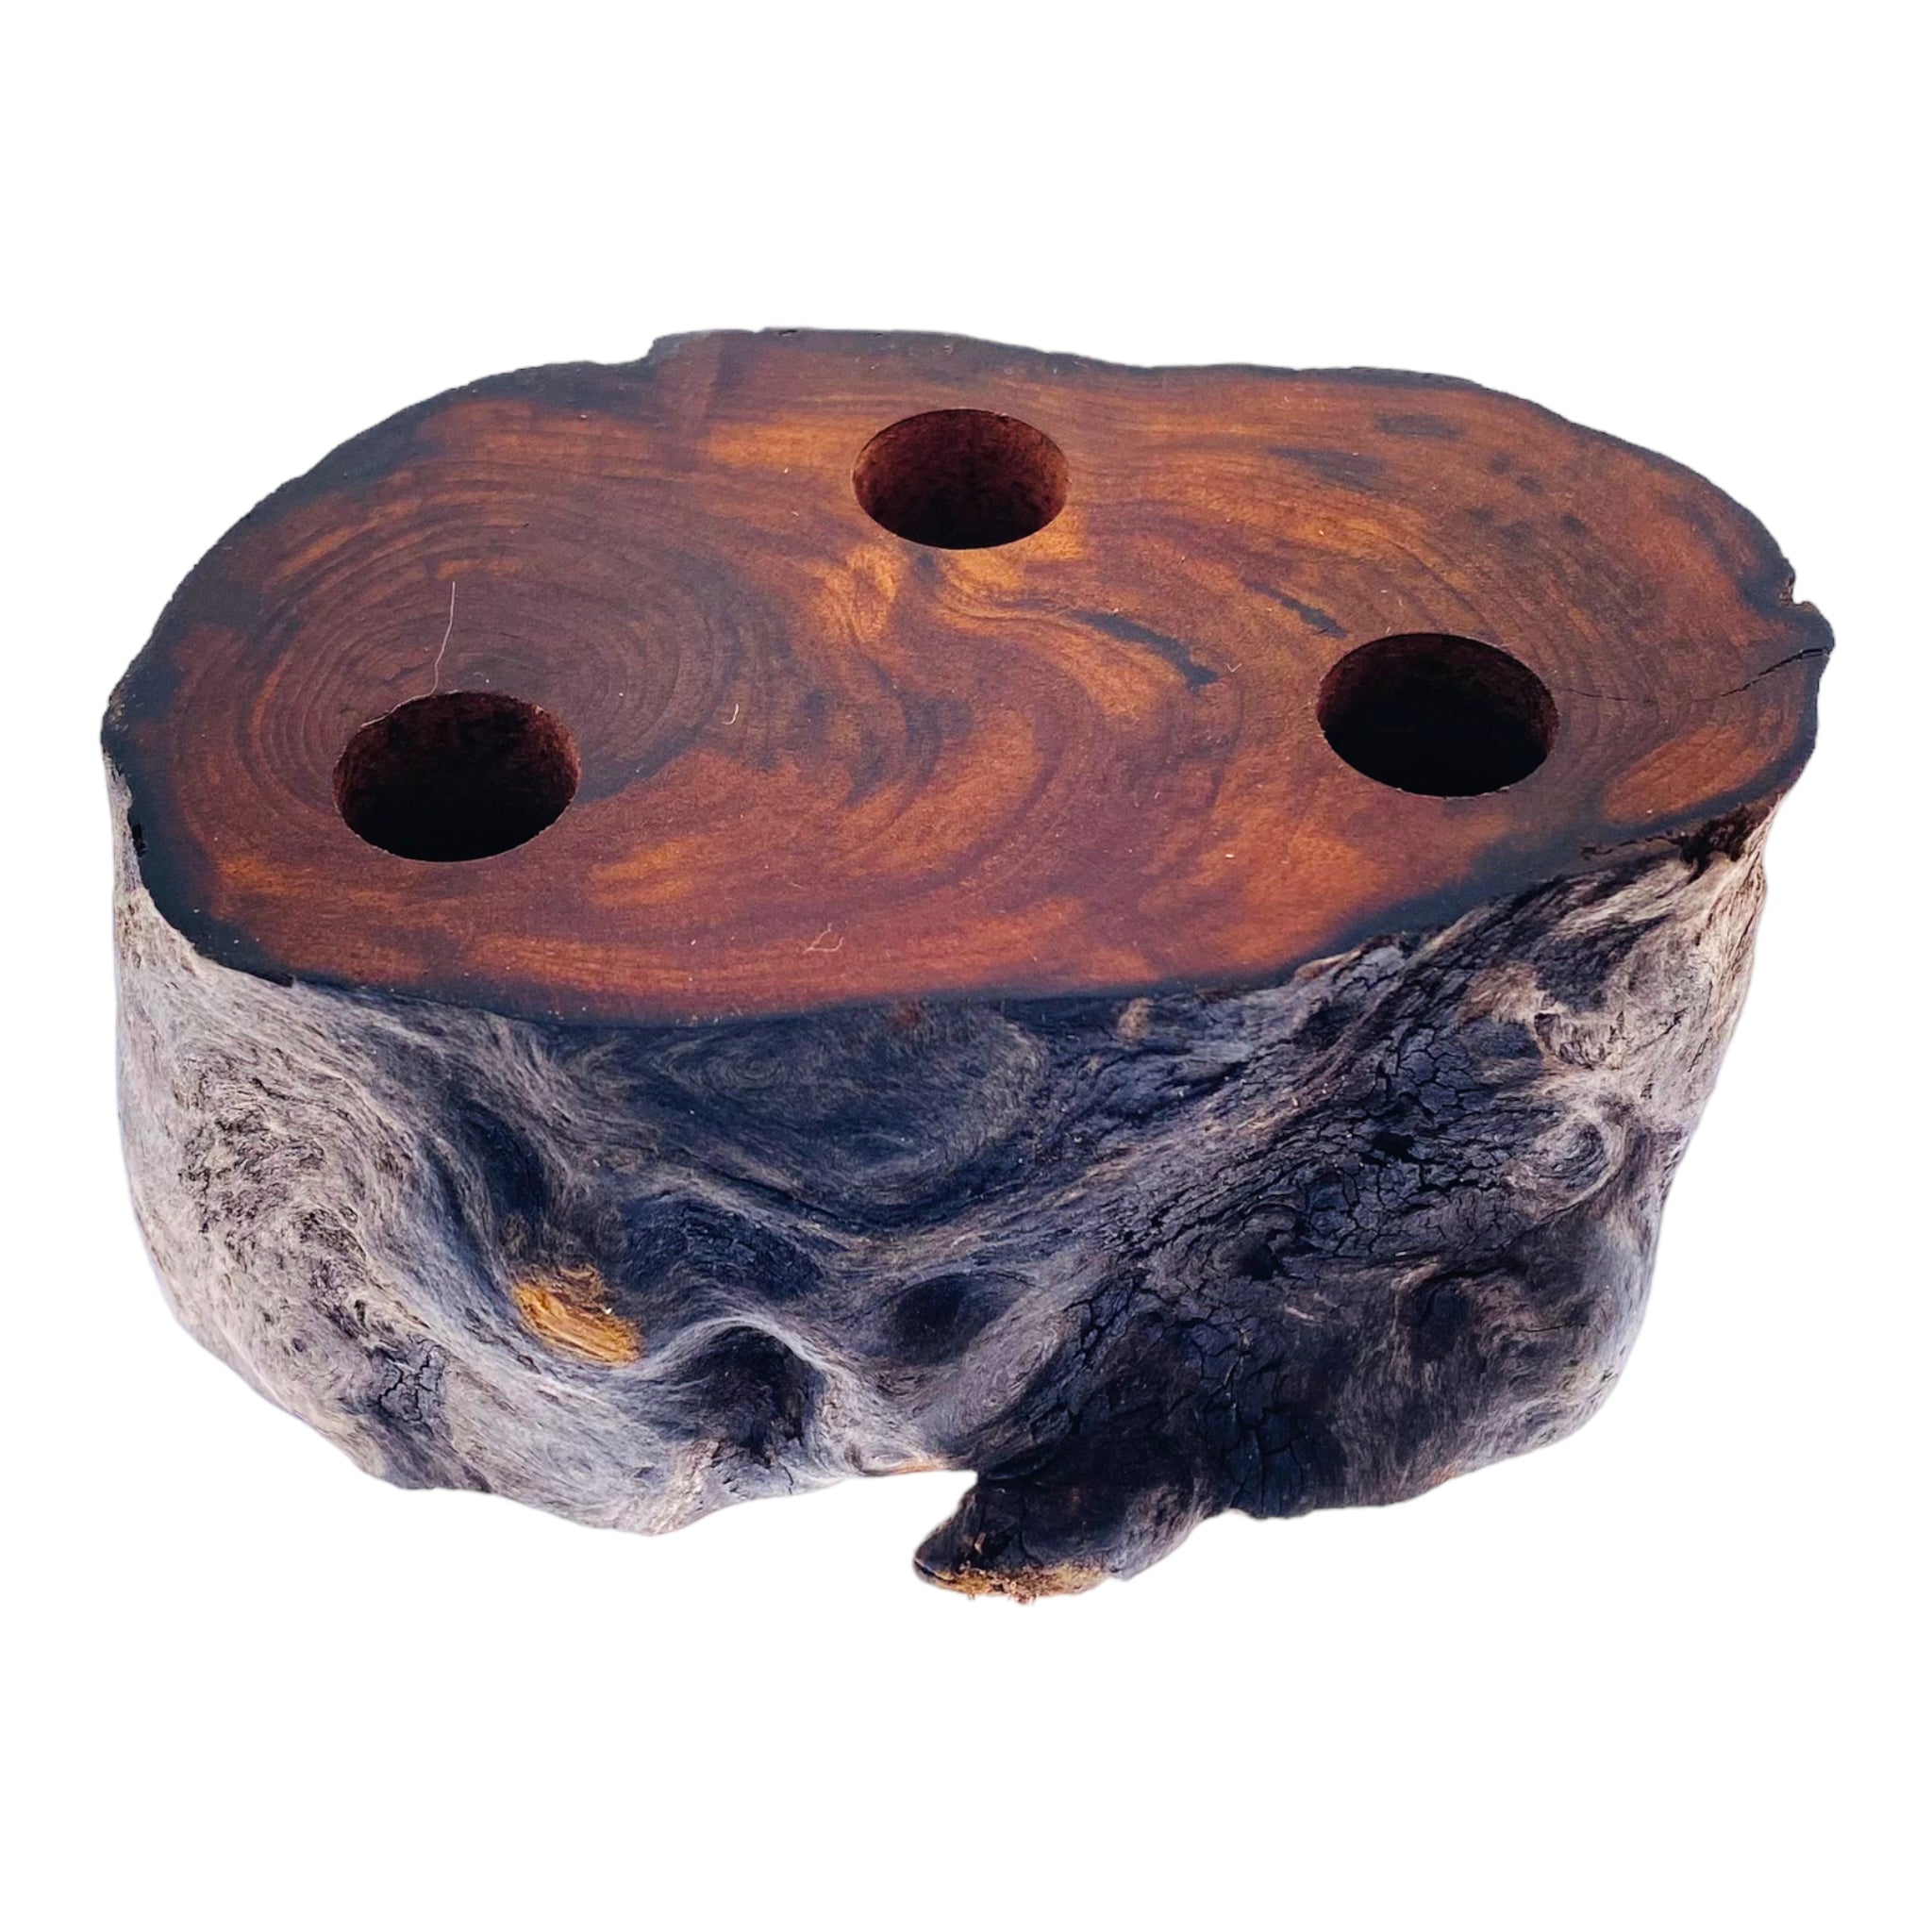 3 Hole Wood Display Stand Holder For 14mm Bong Bowl Pieces Or Quartz Bangers - Red Wood Burl With Live Edge #3